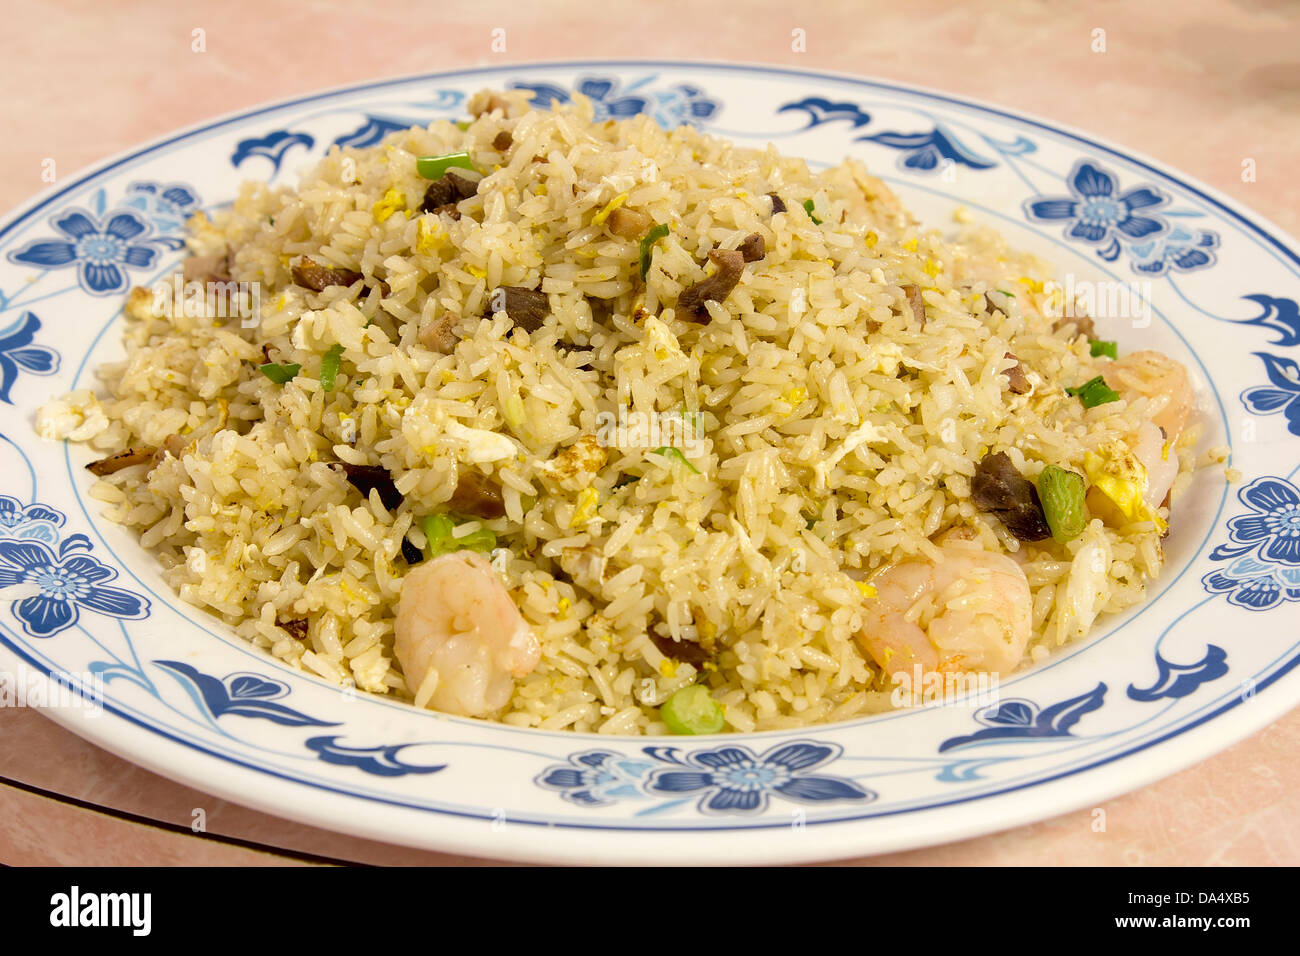 Chinese Yang Chow Fried Rice with Eggs Barbeque Pork and Shrimp Stock Photo